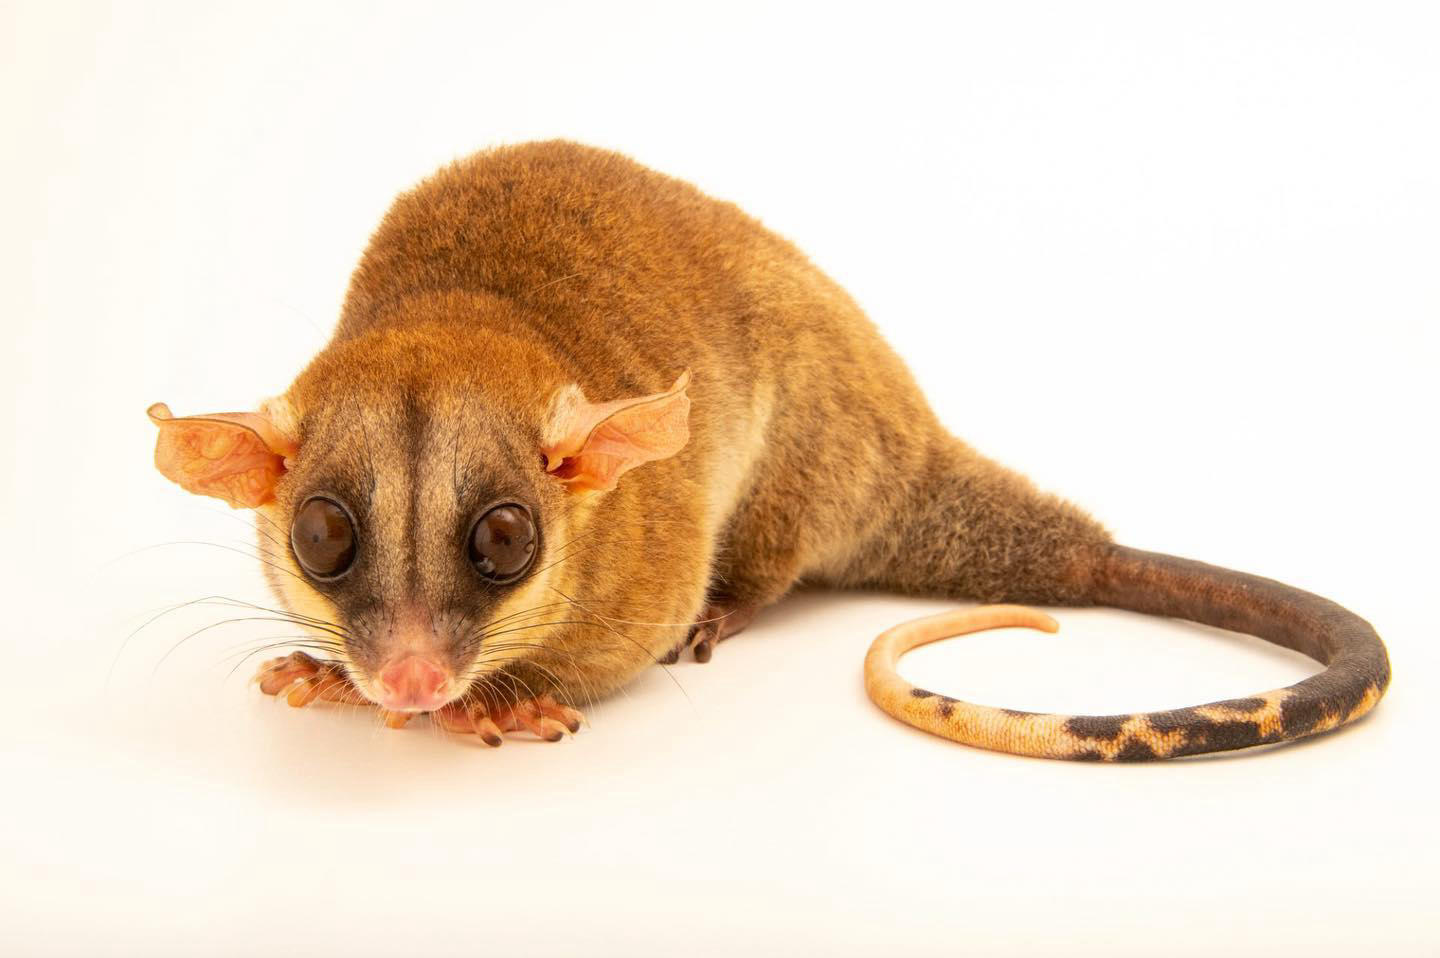 Joel Sartore- Photo Ark - Found in rainforests throughout South America, bare-tailed woolly opossums